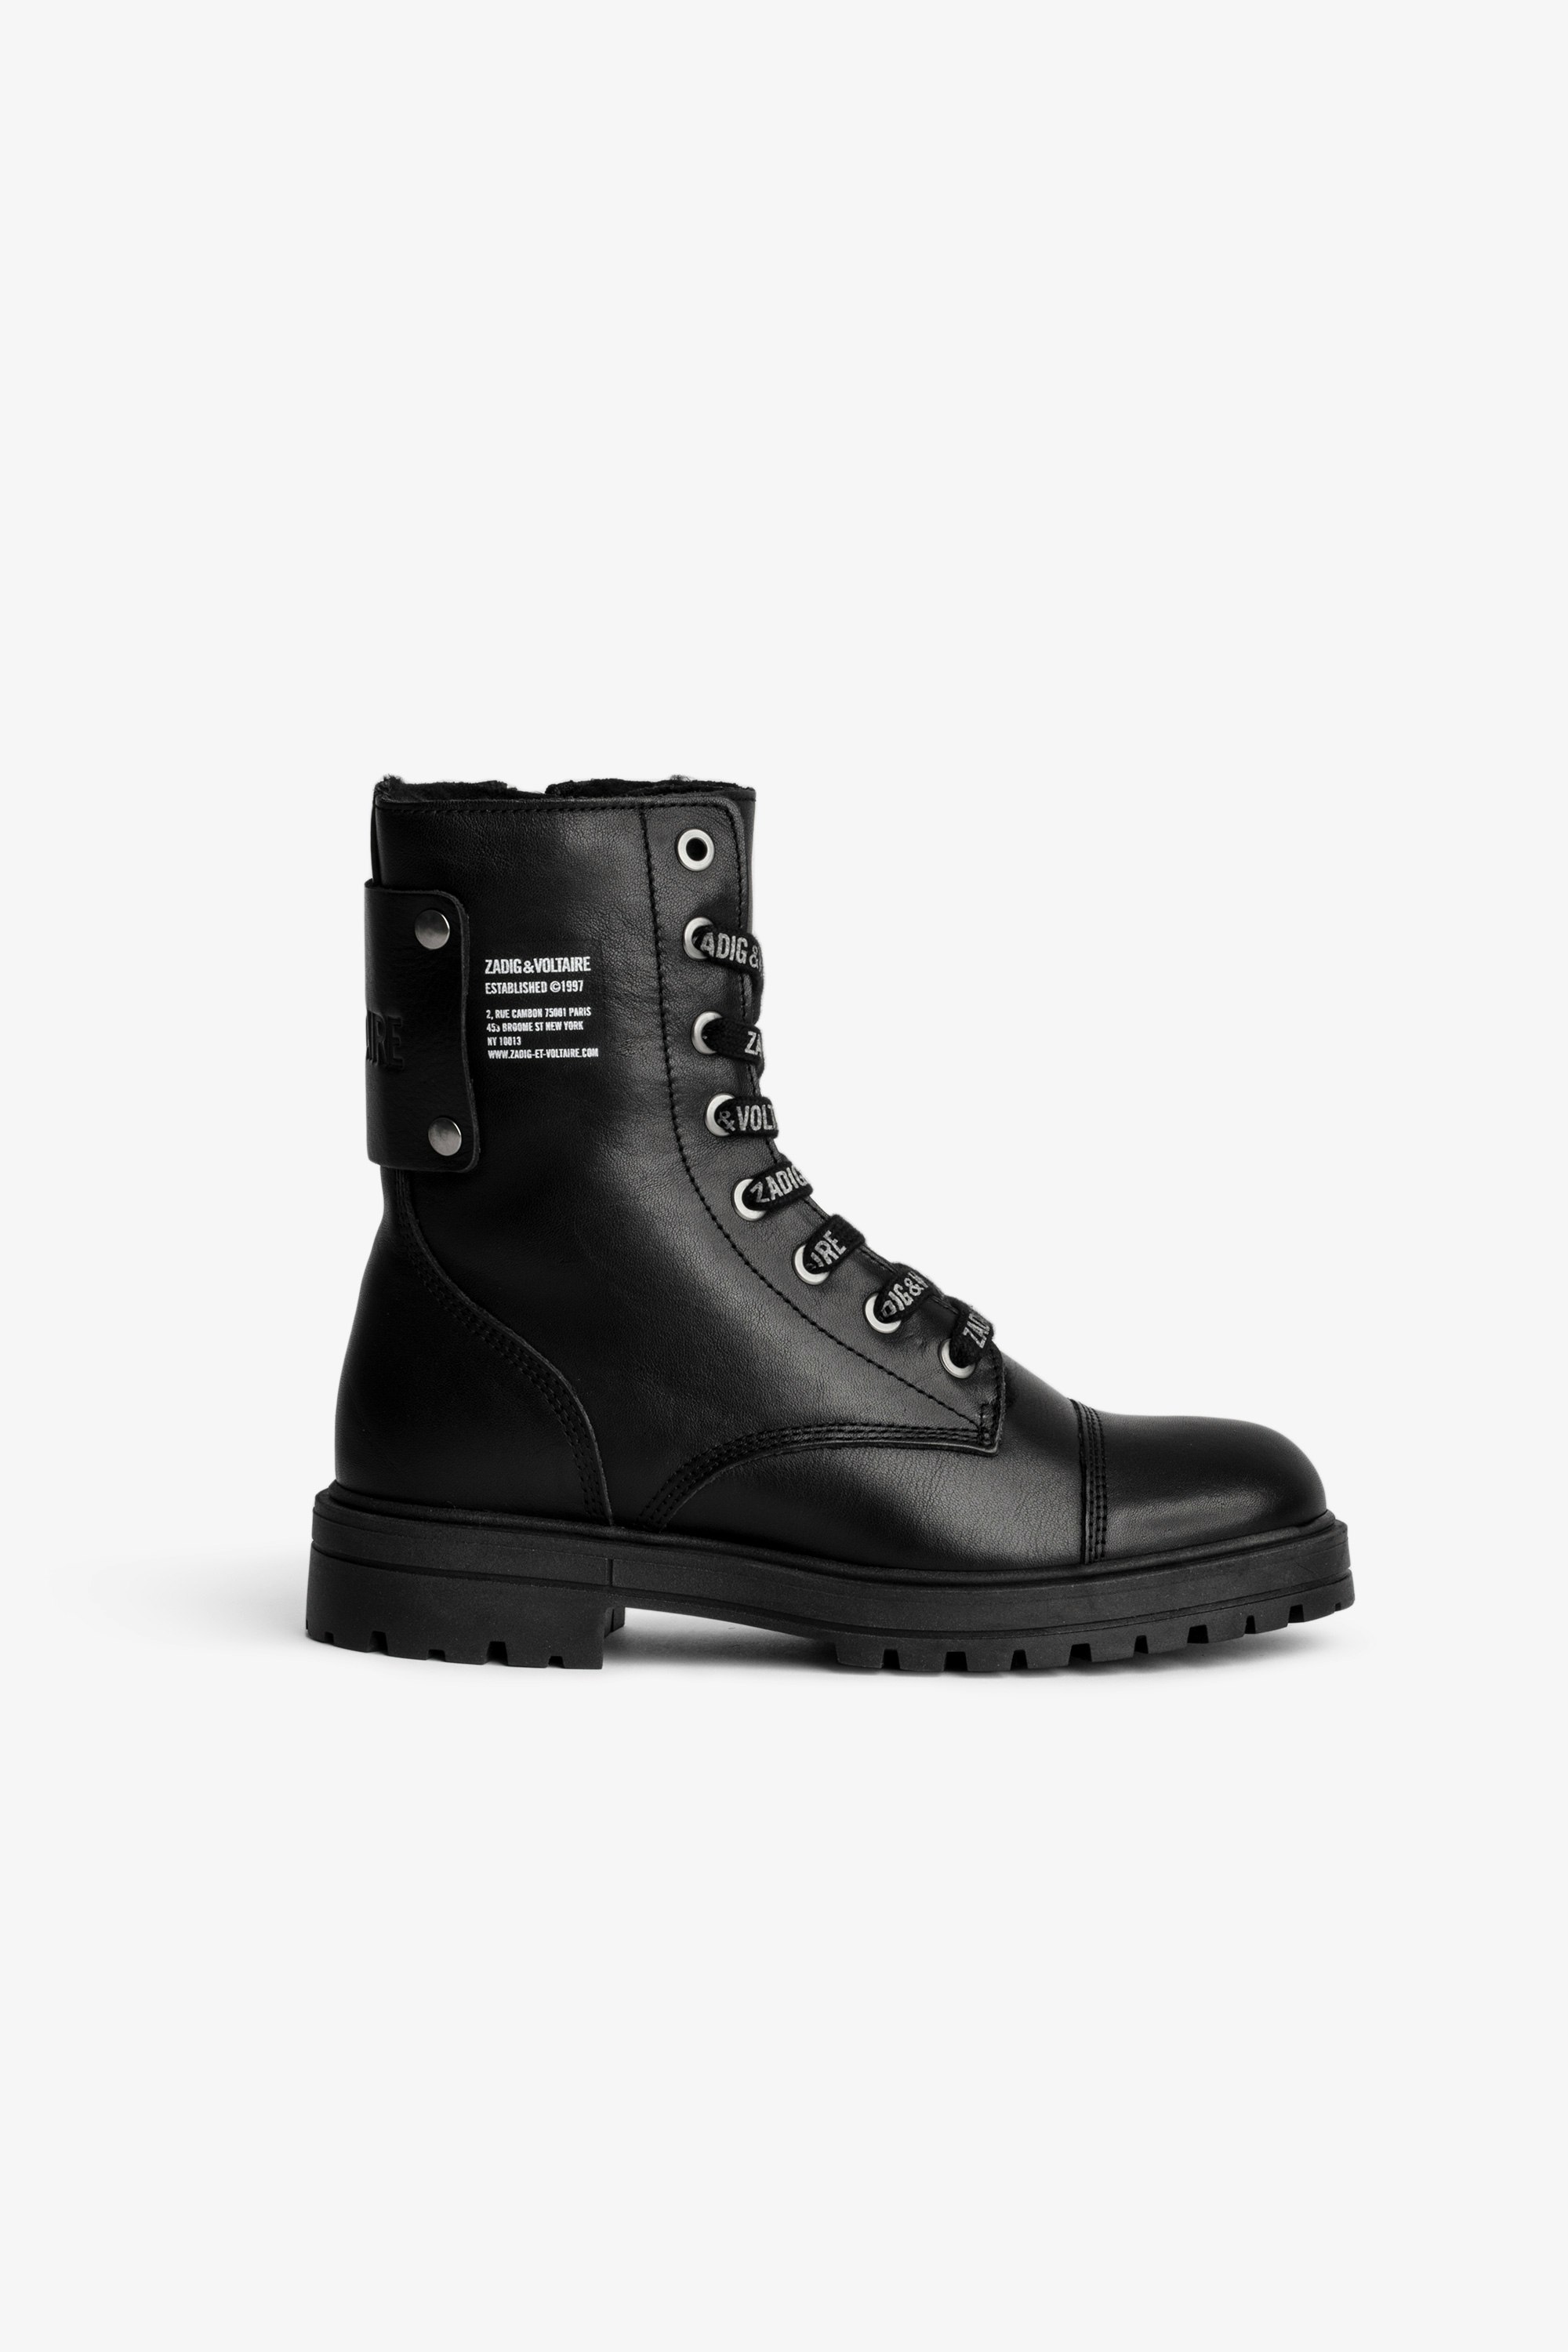 Joe Children’s ブーツ Children’s black leather mid-high boots with insignia print 